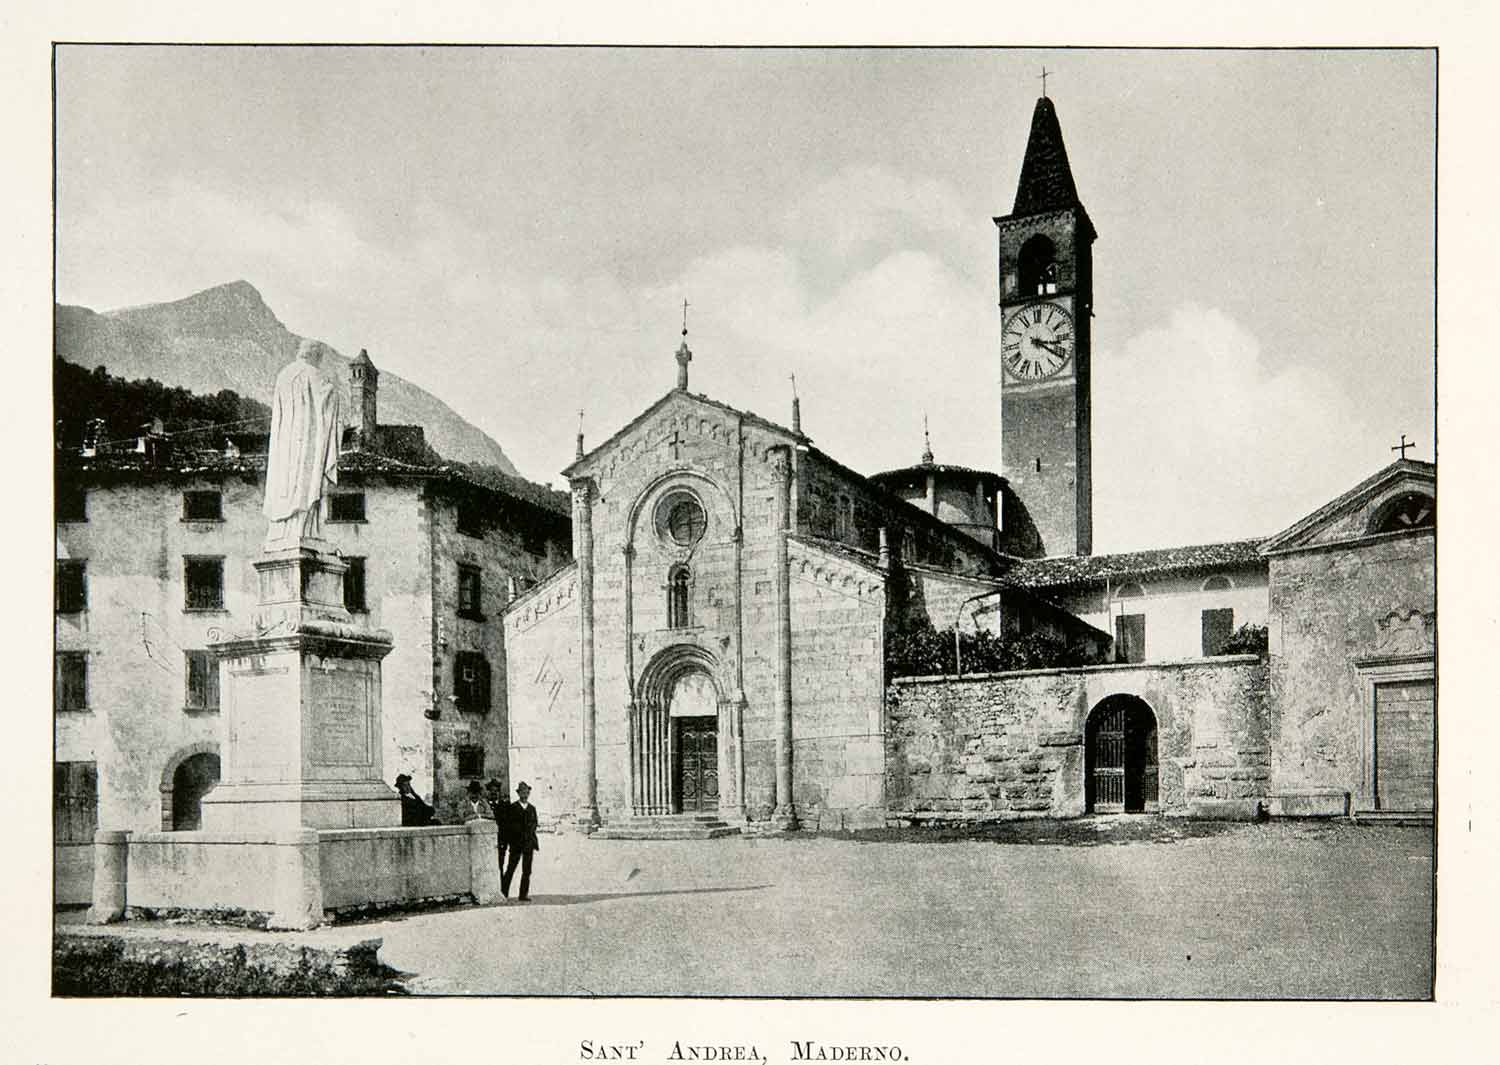 1902 Print St. Andrea Maderno Italy Architecture Church Clock Tower Statue XGWA1